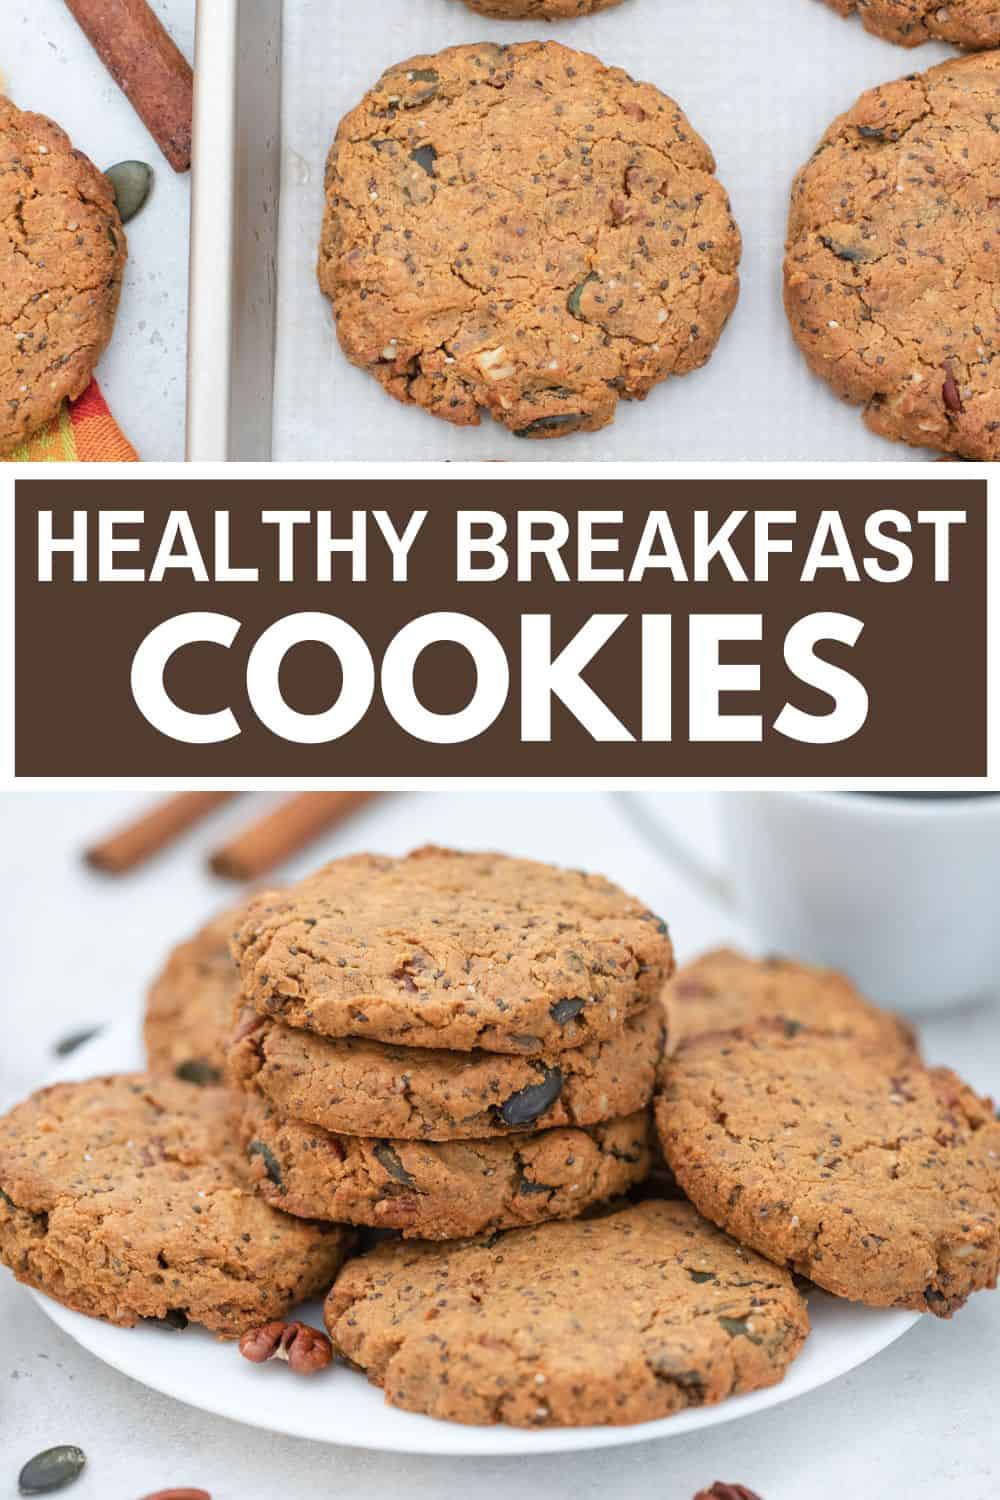 Healthy breakfast cookies with title text overlay.